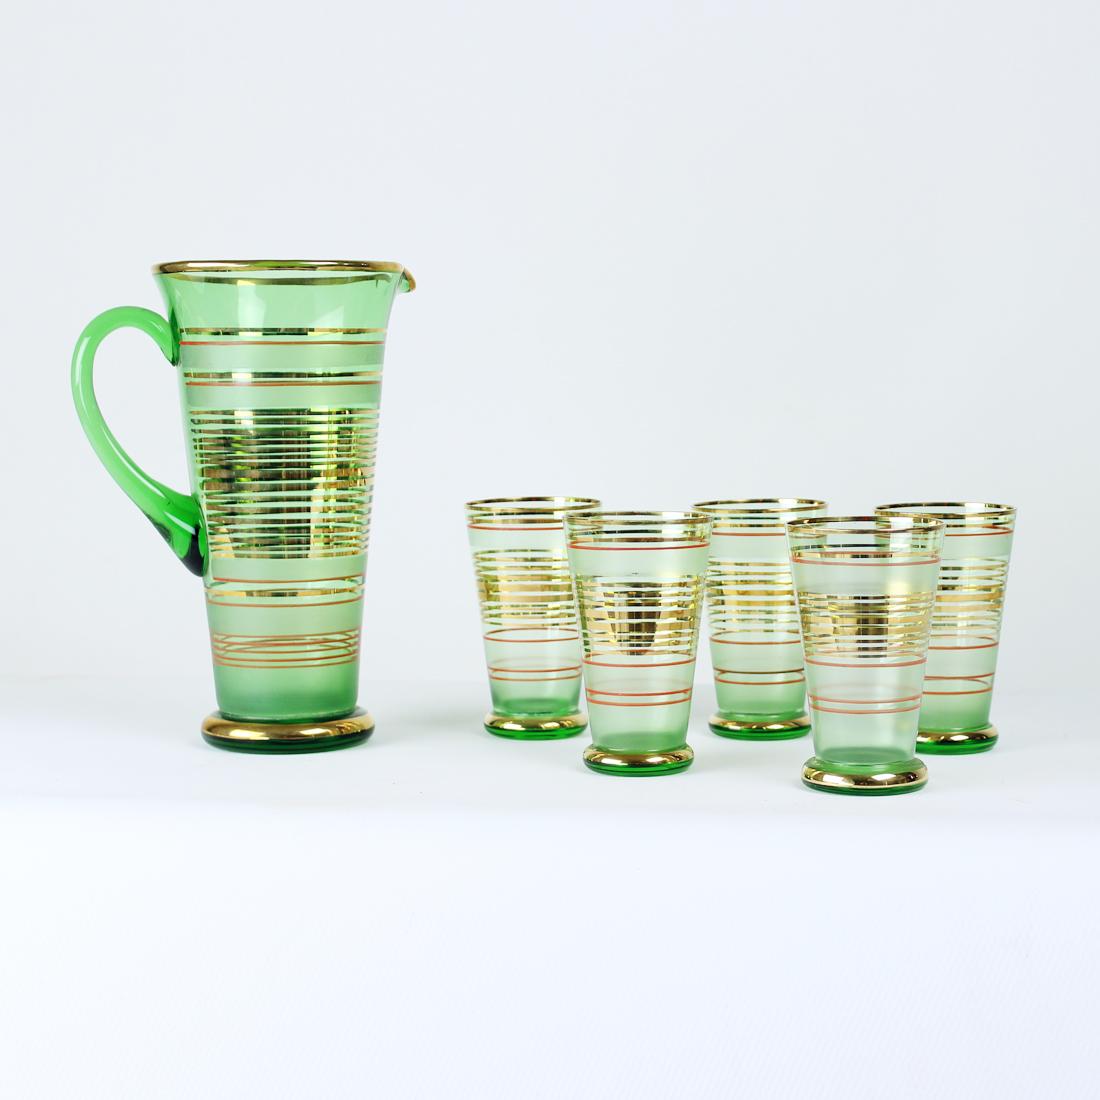 Beautiful mid-century modern design set of drinking glasses with a pitcher. Produced in Czechoslovakia by Borske Sklo, glass union in 1968. The set is in the most wonderful finish with green, red and gold finish on the design. The gold is real gold